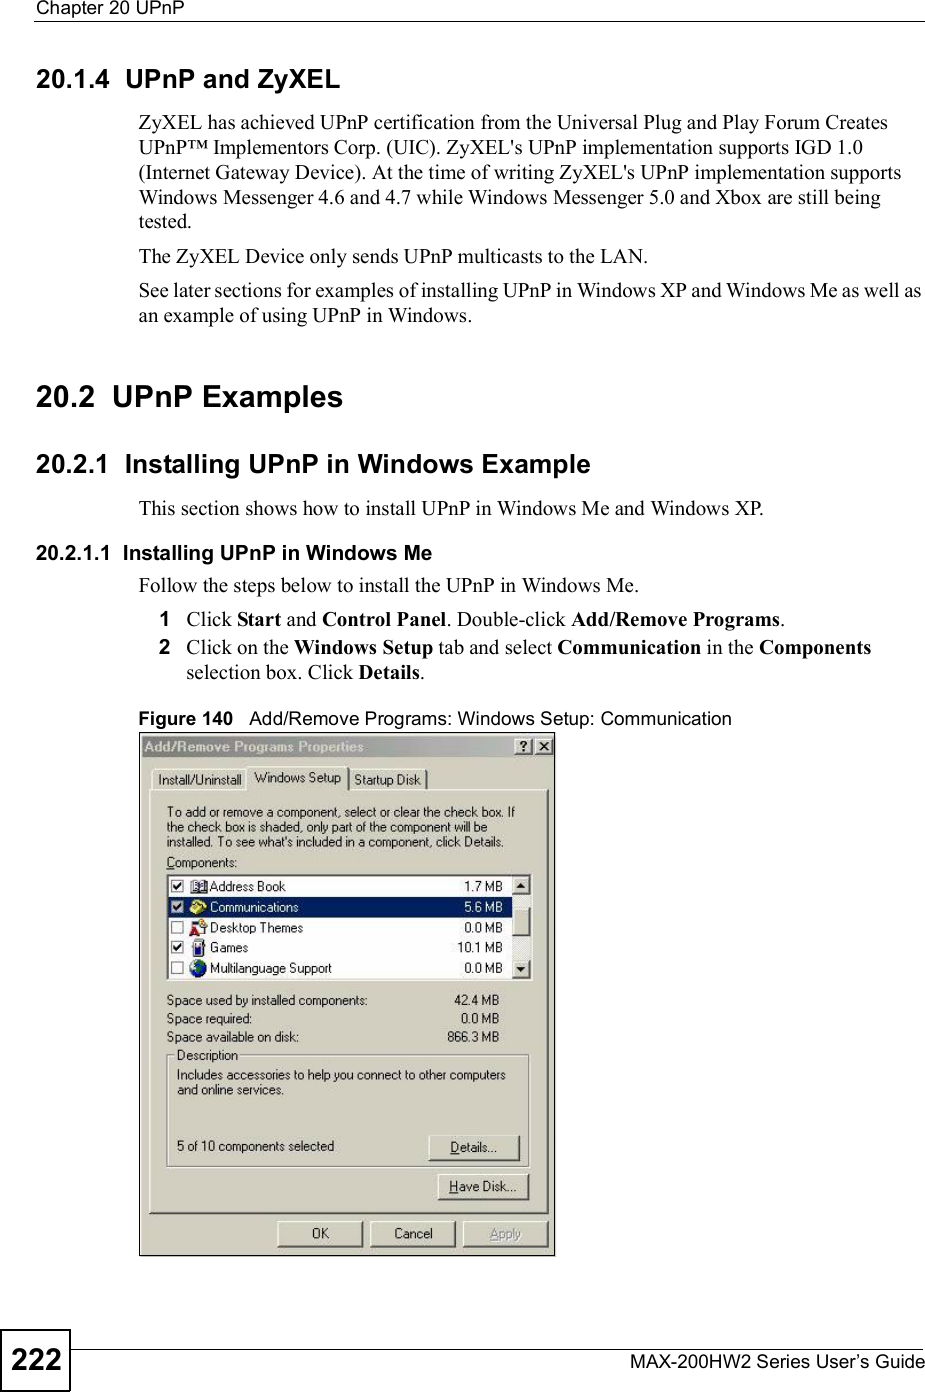 Chapter 20UPnPMAX-200HW2 Series User s Guide22220.1.4  UPnP and ZyXELZyXEL has achieved UPnP certification from the Universal Plug and Play Forum Creates UPnP&amp; Implementors Corp. (UIC). ZyXEL&apos;s UPnP implementation supports IGD 1.0 (Internet Gateway Device). At the time of writing ZyXEL&apos;s UPnP implementation supports Windows Messenger 4.6 and 4.7 while Windows Messenger 5.0 and Xbox are still being tested.The ZyXEL Device only sends UPnP multicasts to the LAN.See later sections for examples of installing UPnP in Windows XP and Windows Me as well as an example of using UPnP in Windows.20.2  UPnP Examples20.2.1  Installing UPnP in Windows ExampleThis section shows how to install UPnP in Windows Me and Windows XP. 20.2.1.1  Installing UPnP in Windows MeFollow the steps below to install the UPnP in Windows Me. 1Click Start and Control Panel. Double-click Add/Remove Programs.2Click on the Windows Setup tab and select Communication in the Componentsselection box. Click Details.Figure 140   Add/Remove Programs: Windows Setup: Communication 